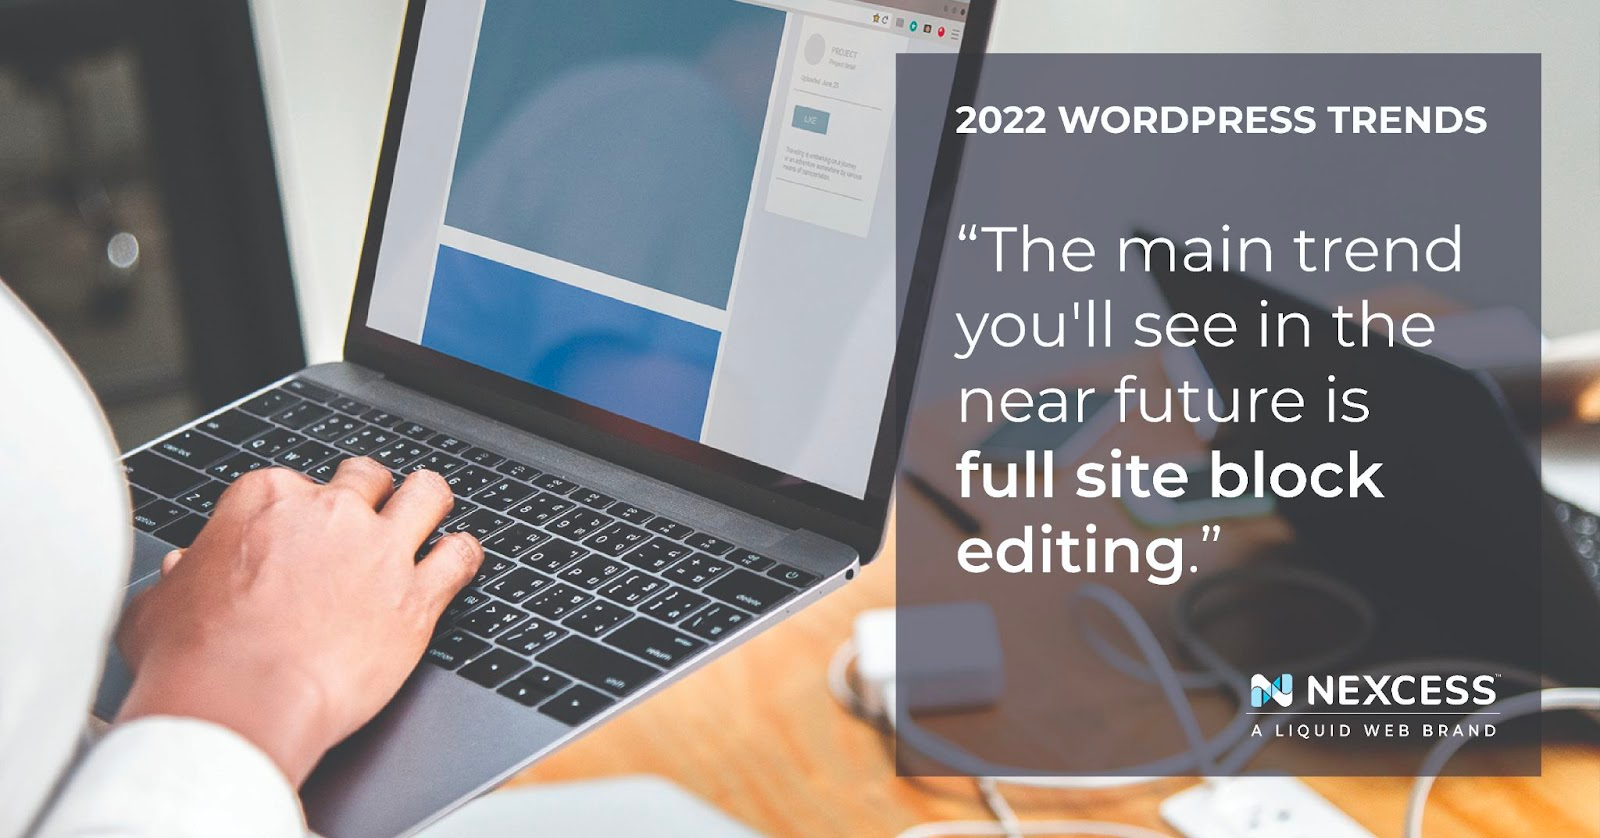 Full site editing is a major 2022 WordPress trend to be expected